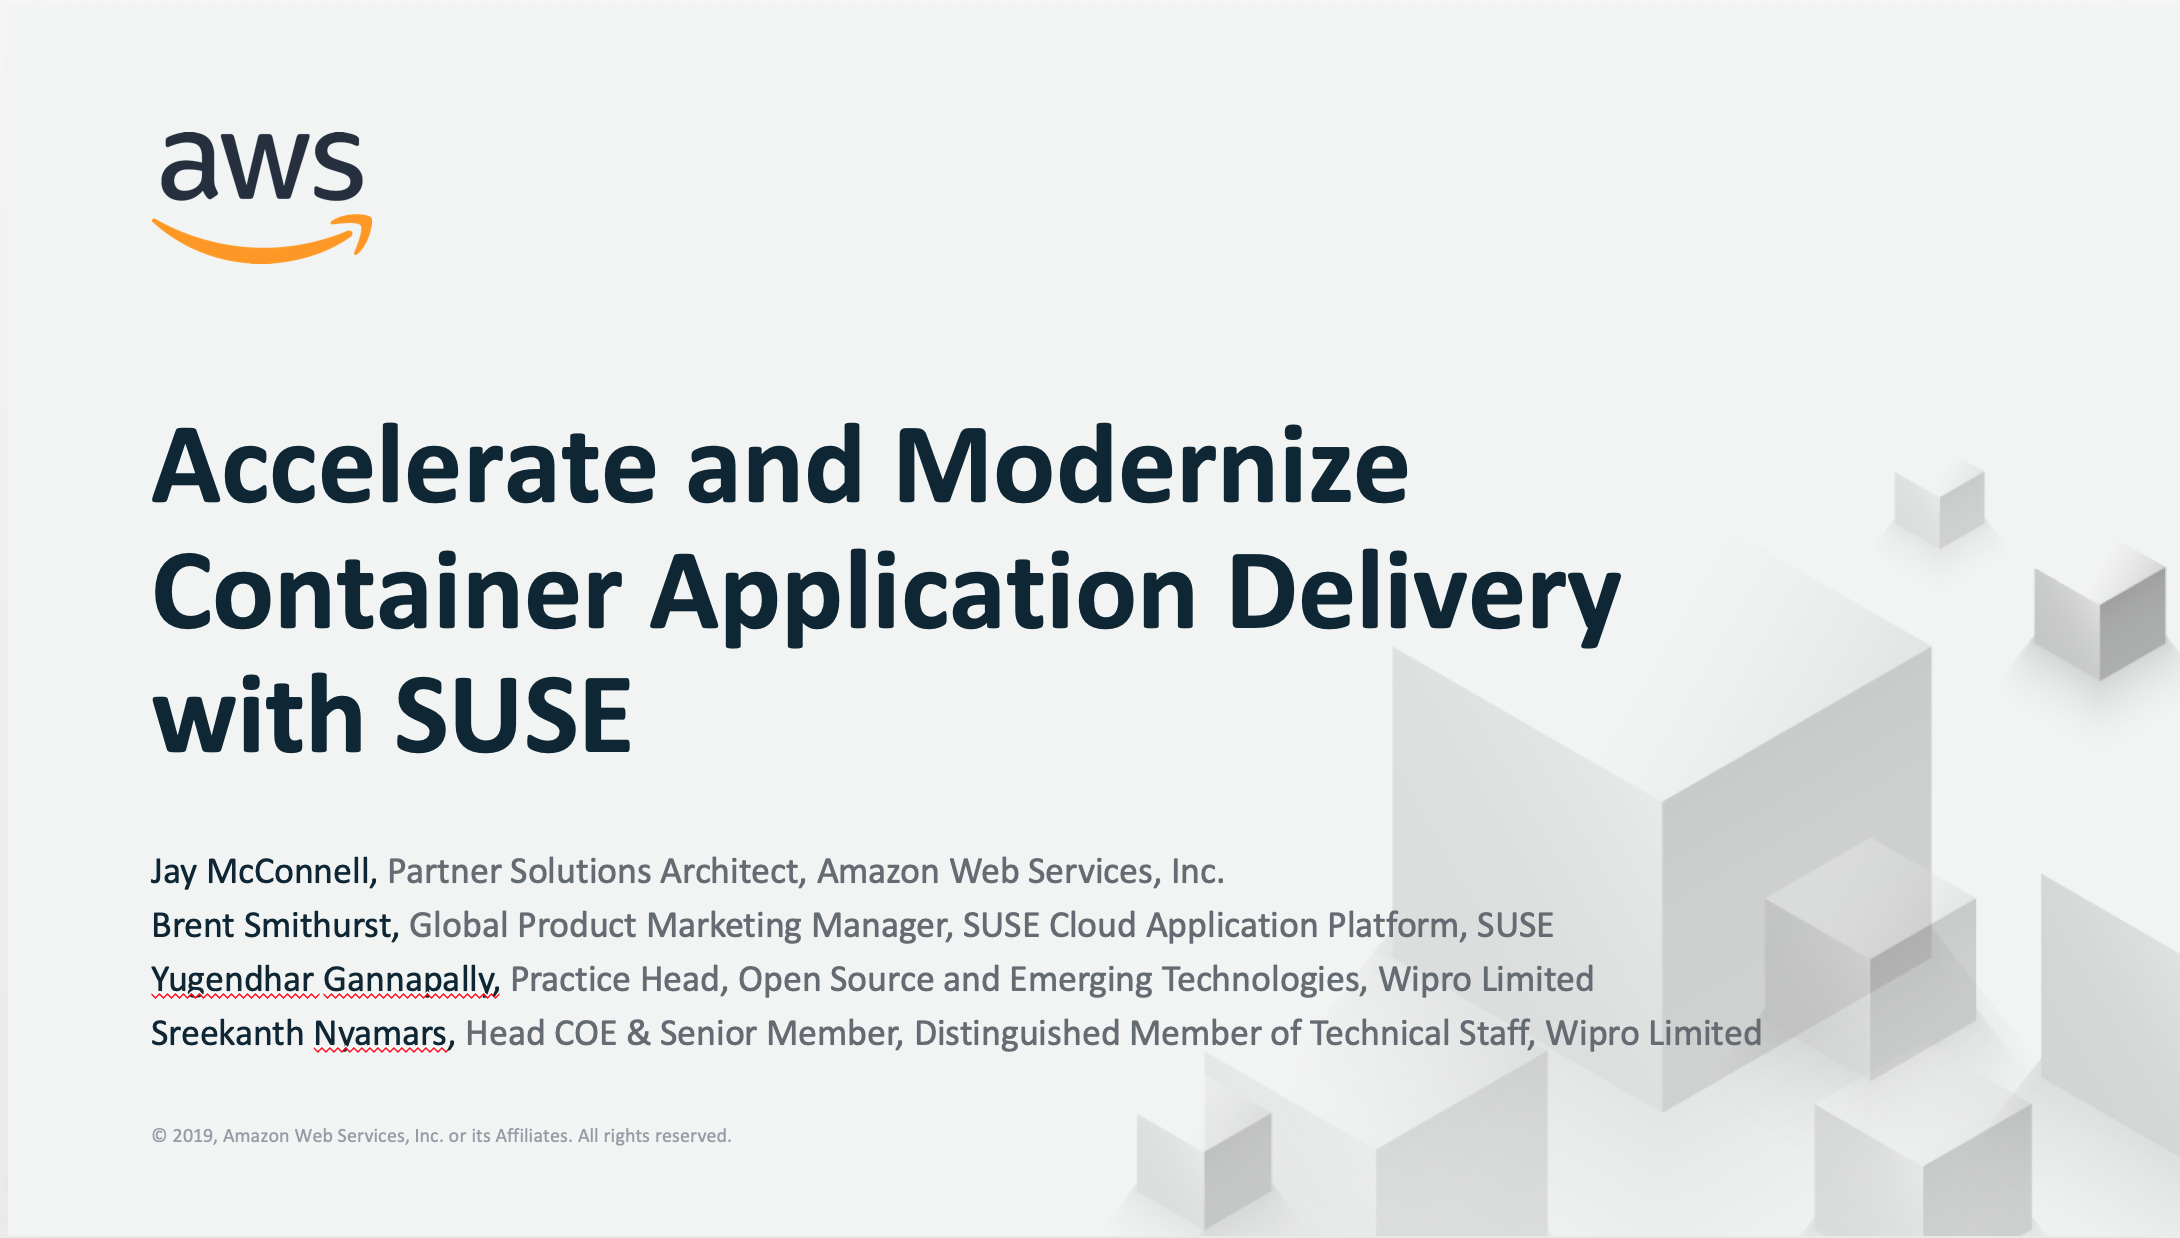 Accelerate and modernize container application delivery with SUSE